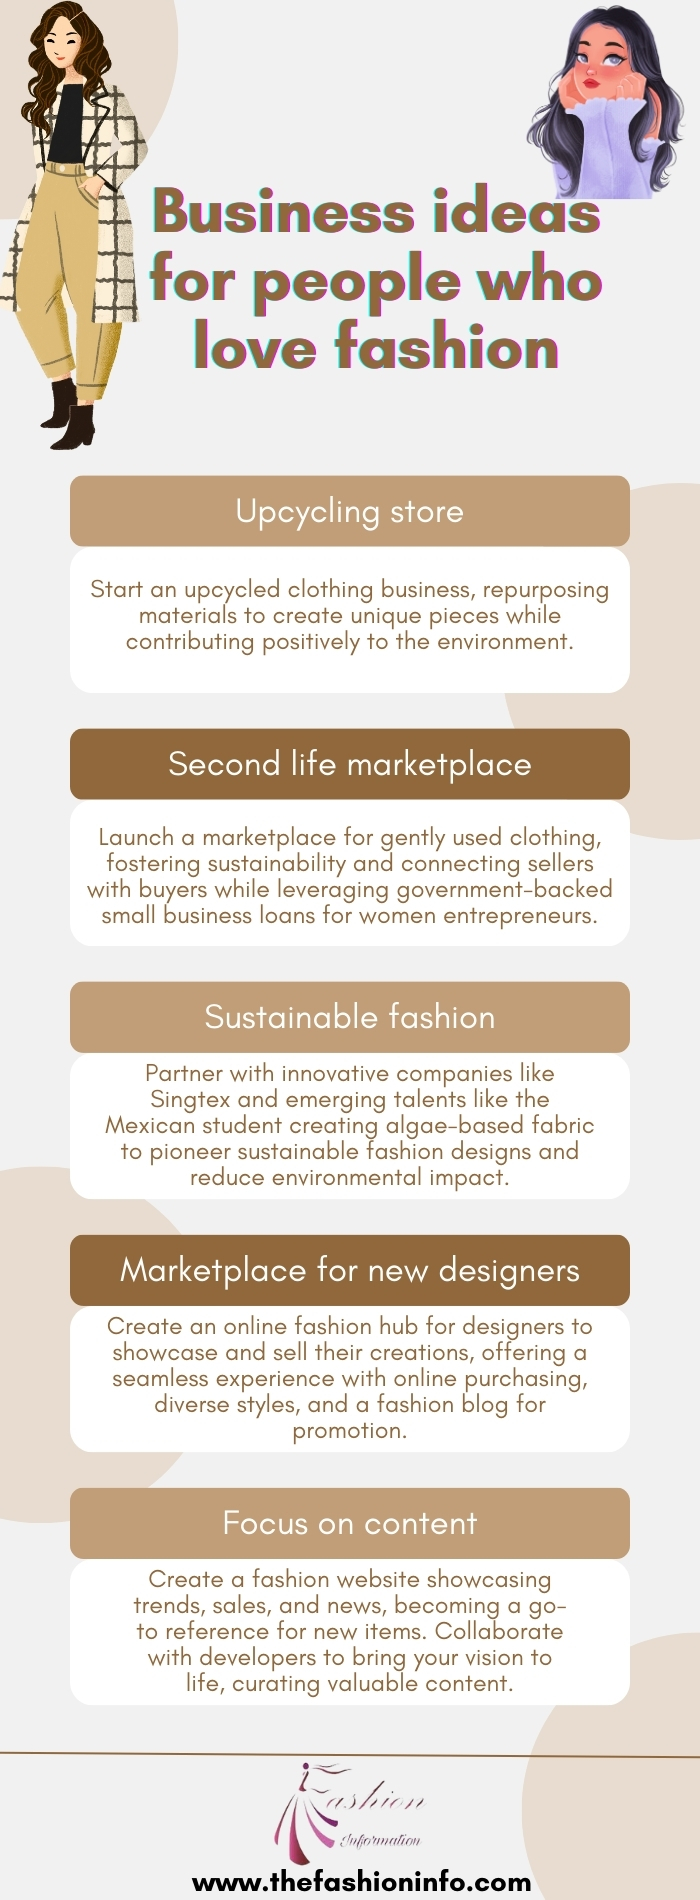 Business ideas for people who love fashion